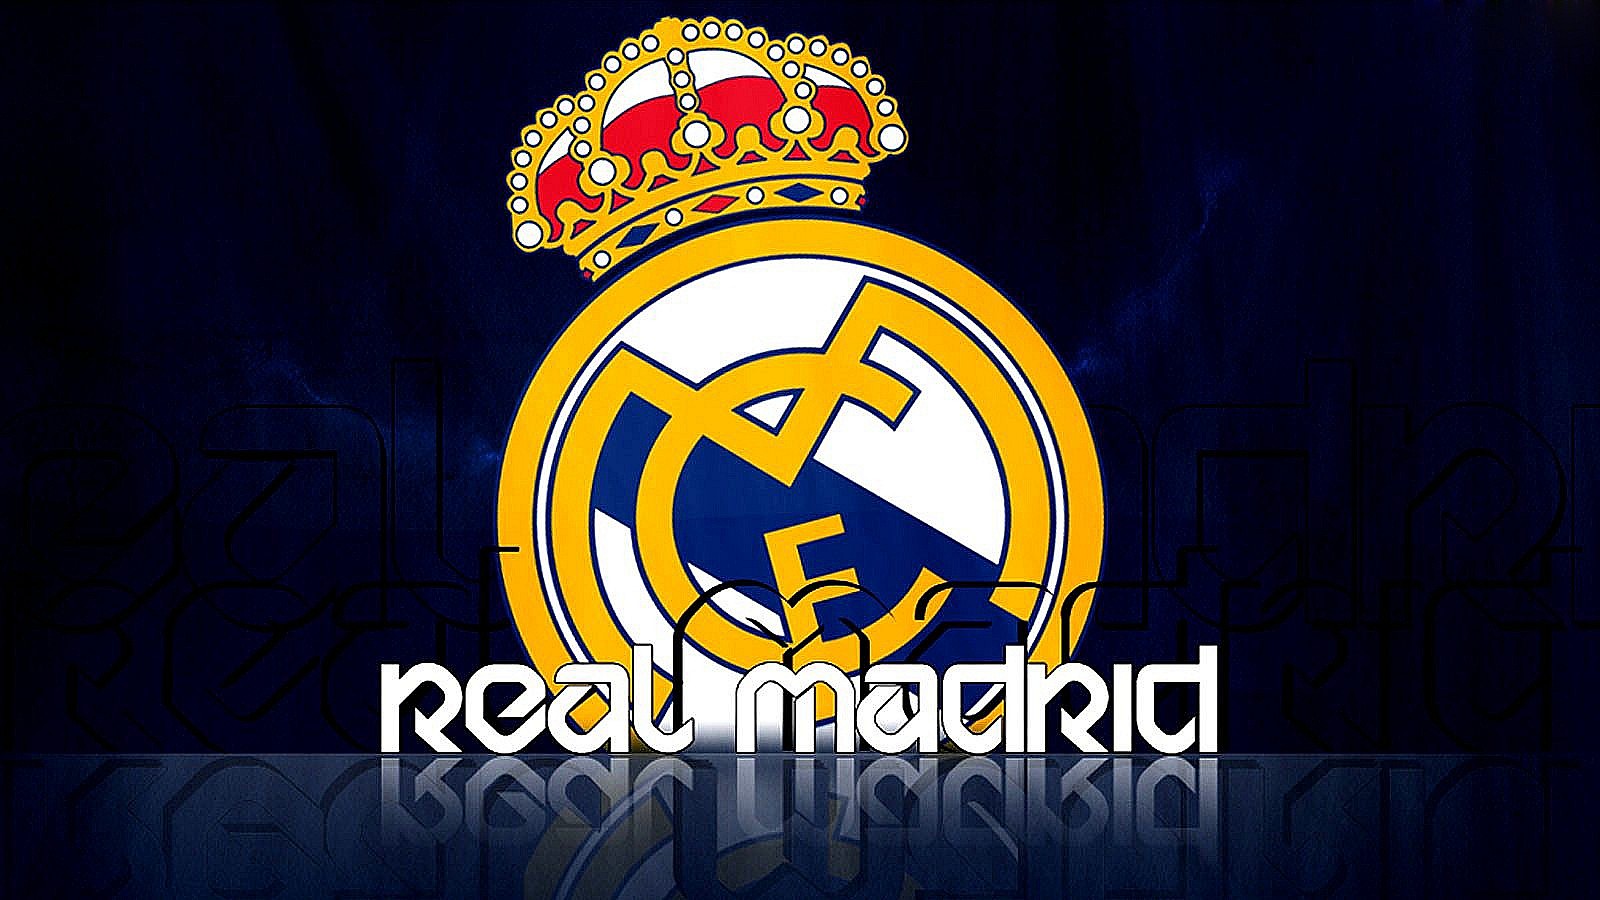 Real Madrid Wallpaper Widescreen Is High Definition You